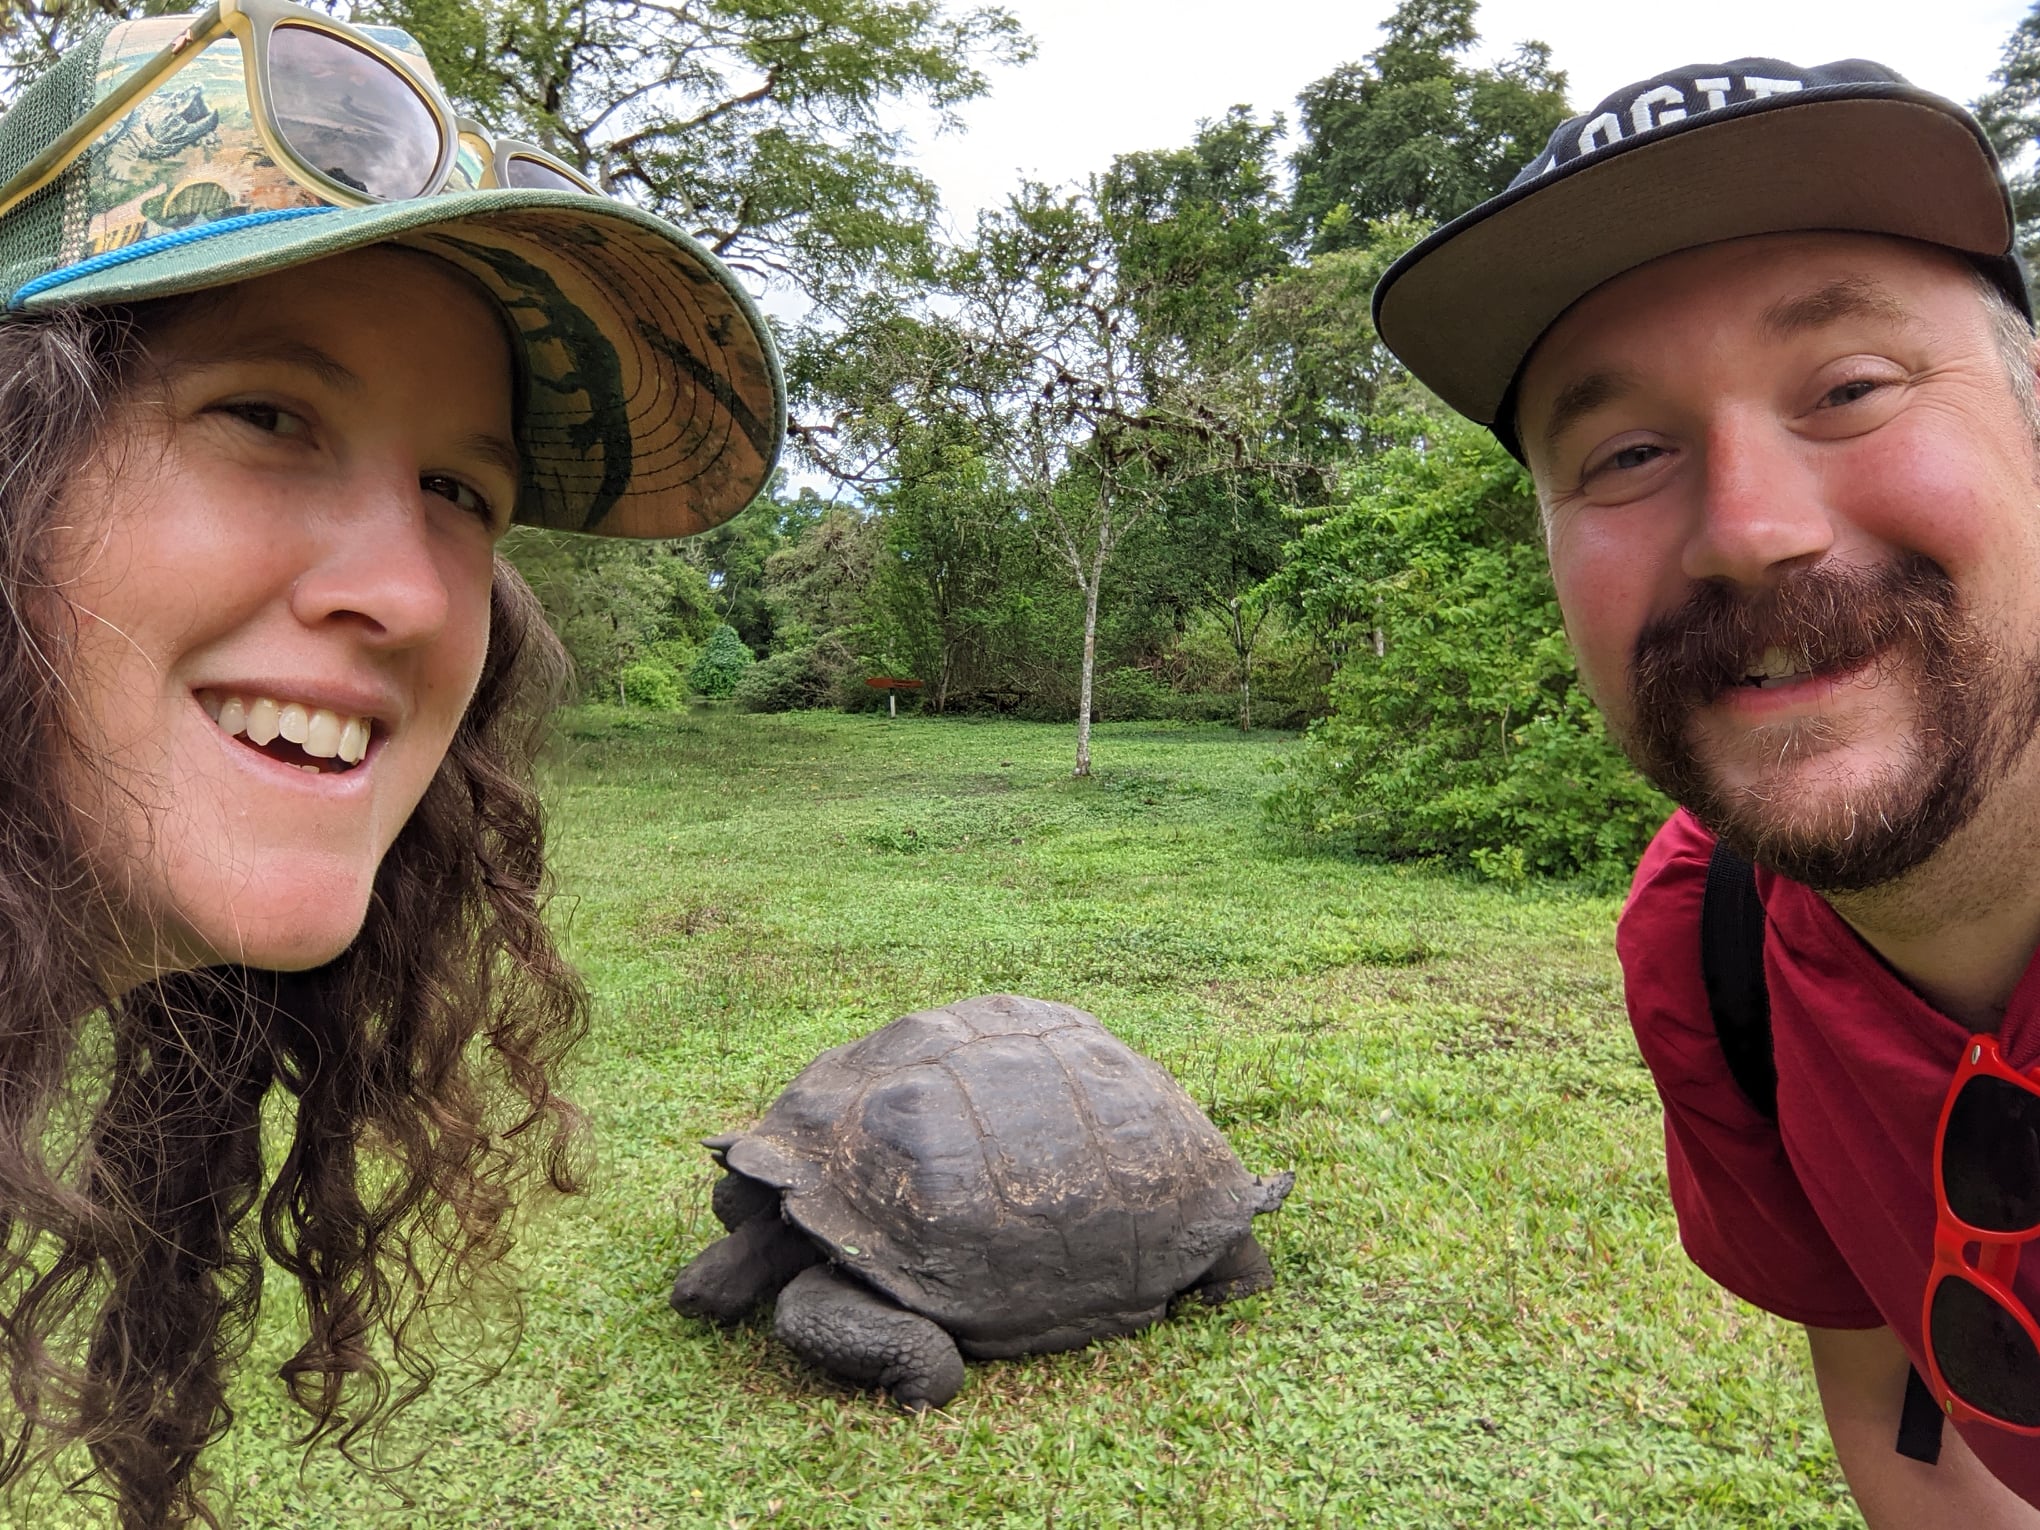 Two people pose for a photo in front of a giant tortoise.